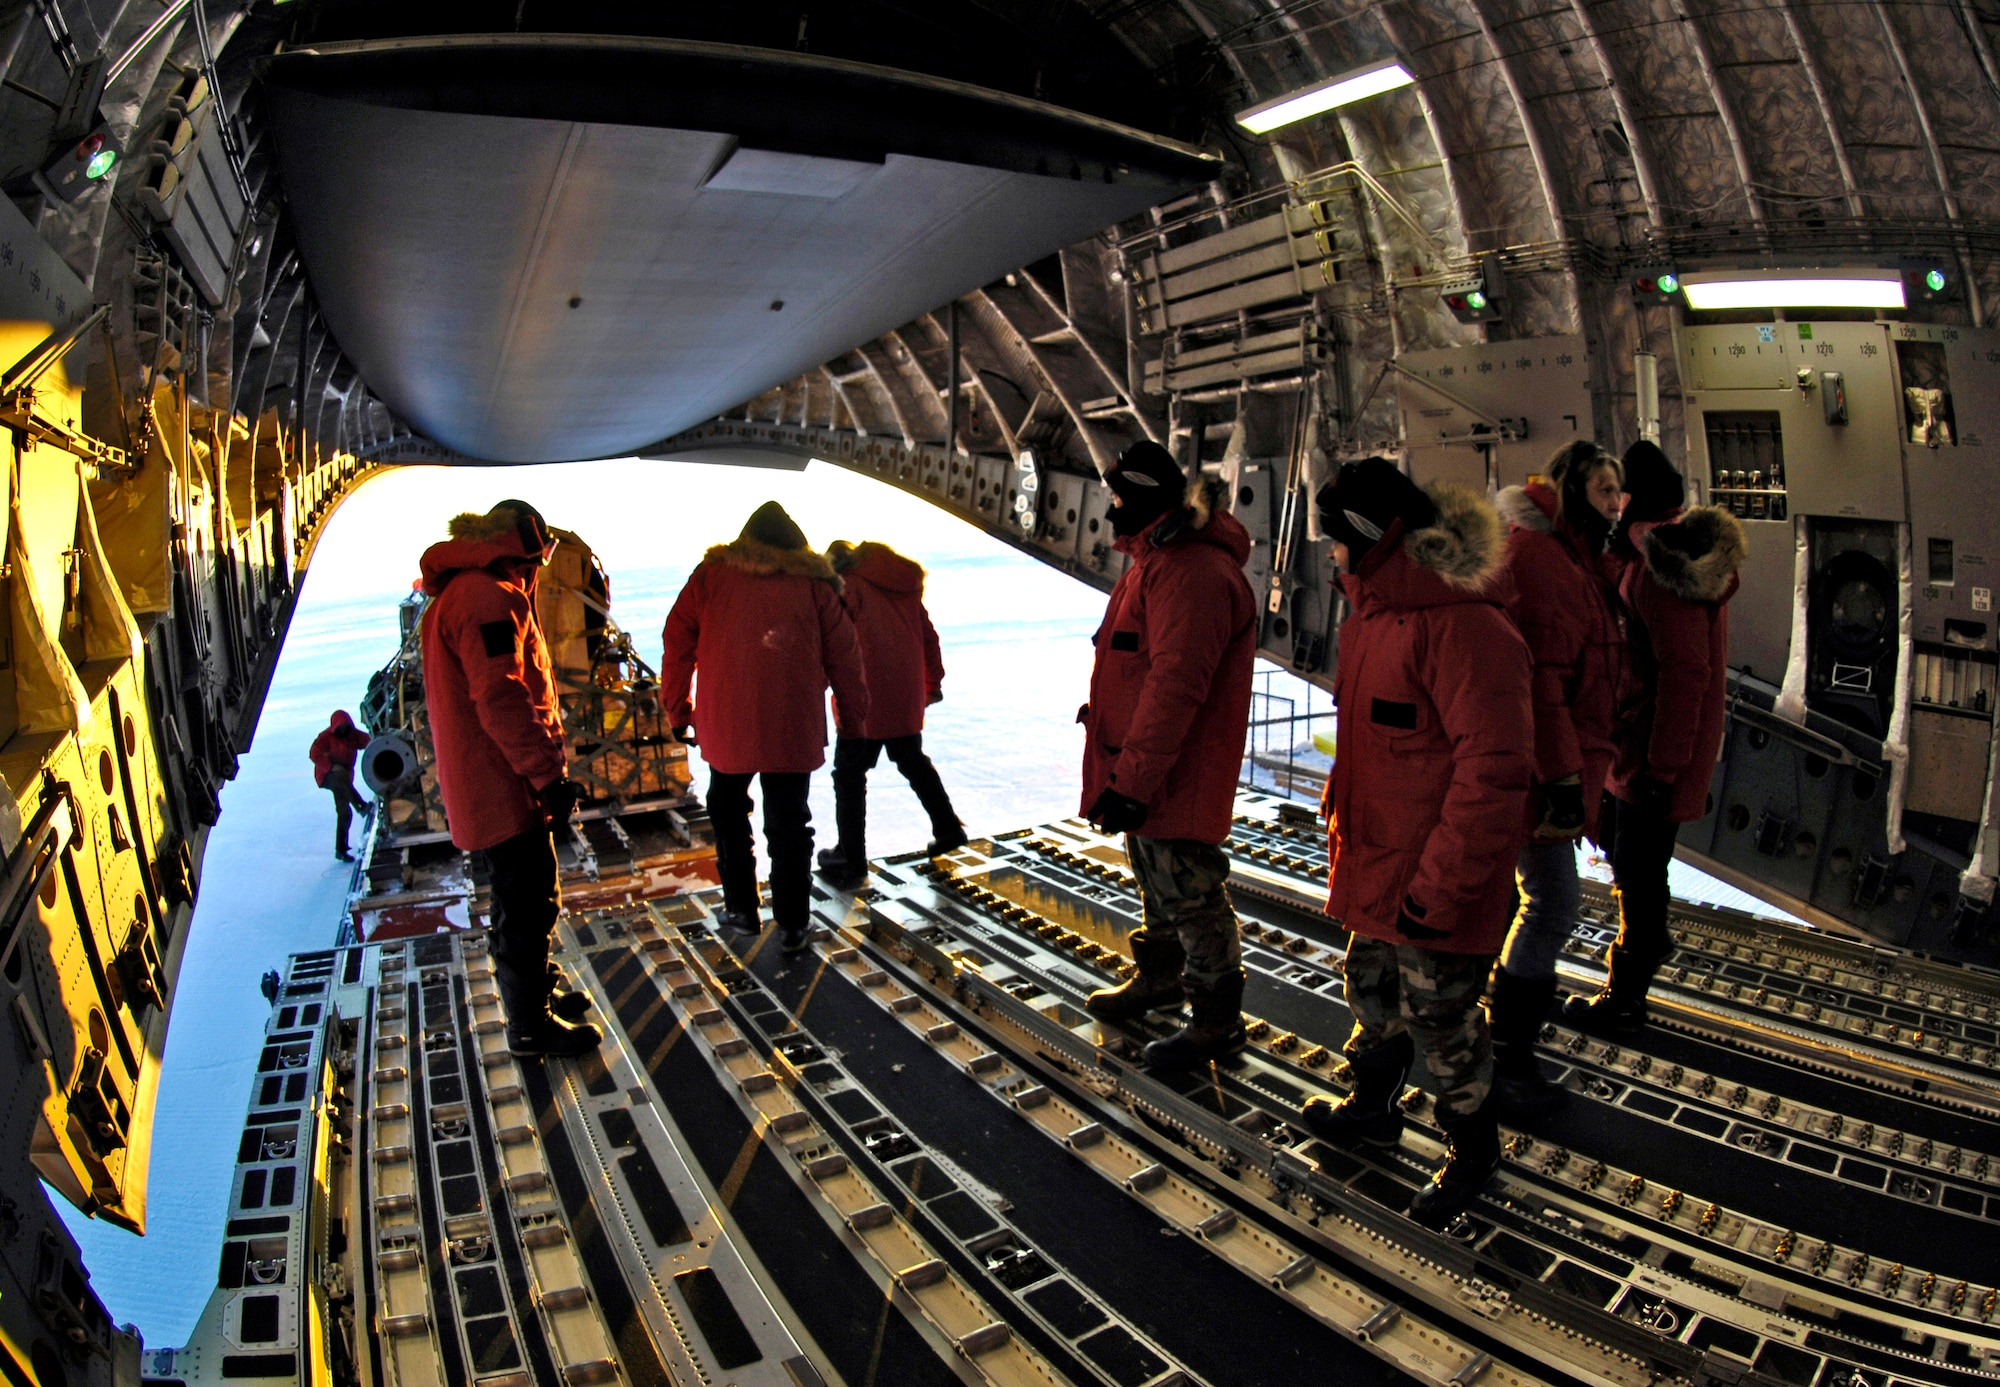 Loadmasters unload cargo from a C-17 Globemaster III during an Operation Deep Freeze winter fly-in mission Aug. 25 at Pegasus White Ice Runway, Antarctica. A C-17 and 31 Airmen from McChord Air Force Base, Wash., conducted the annual winter fly-in augmentation of scientists, support staff, food and equipment for the U.S. Antarctic Program at McMurdo Station, Antarctica. (U.S. Air Force photo/Tech. Sgt. Shane A. Cuomo) 